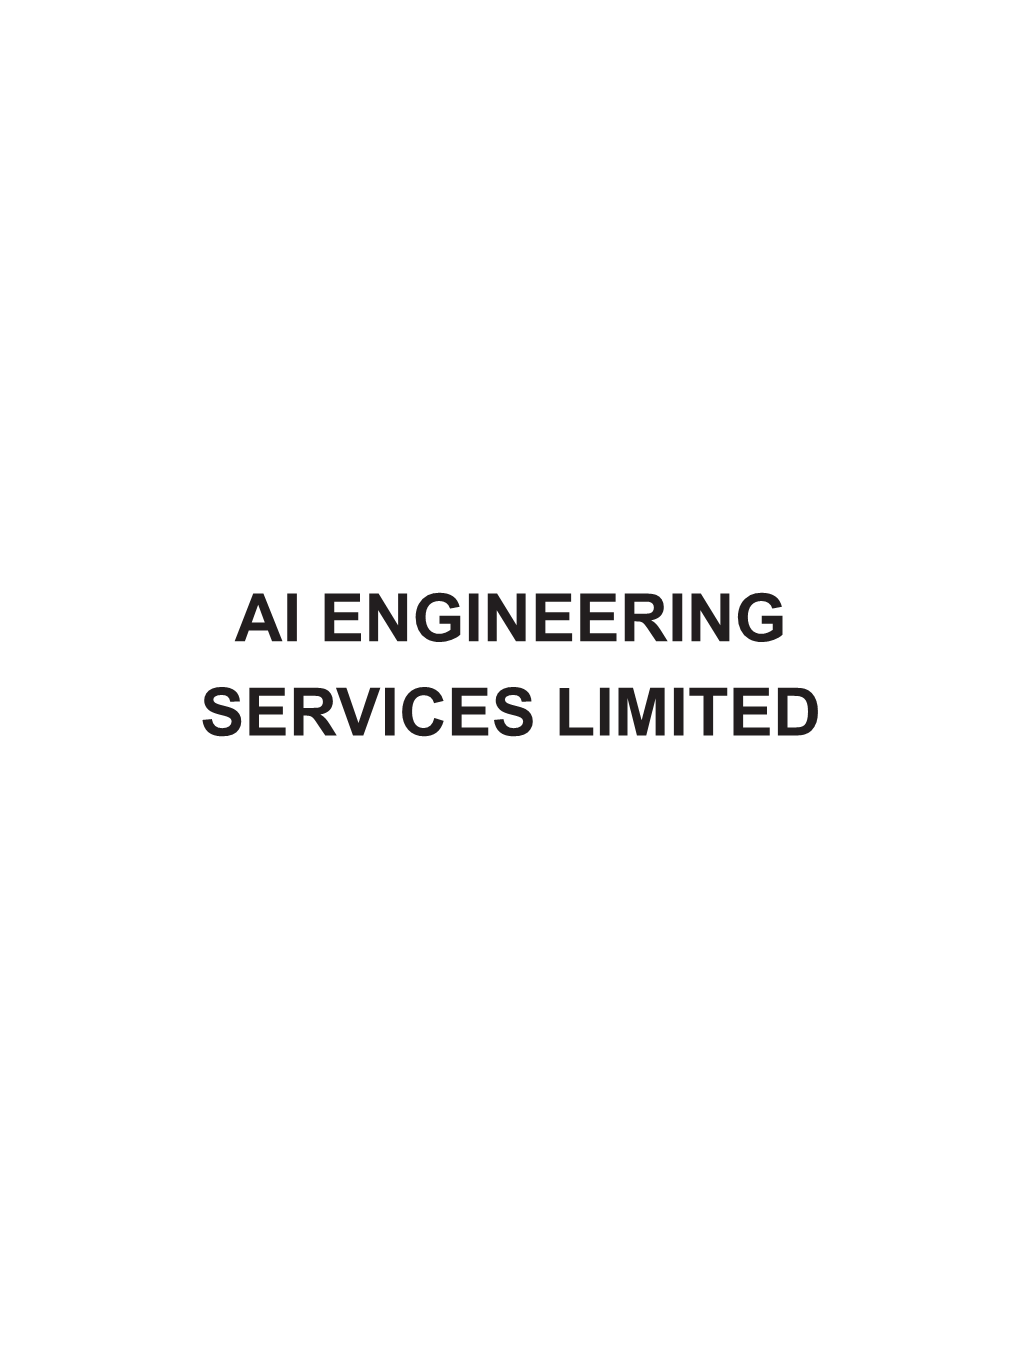 Ai Engineering Services Limited